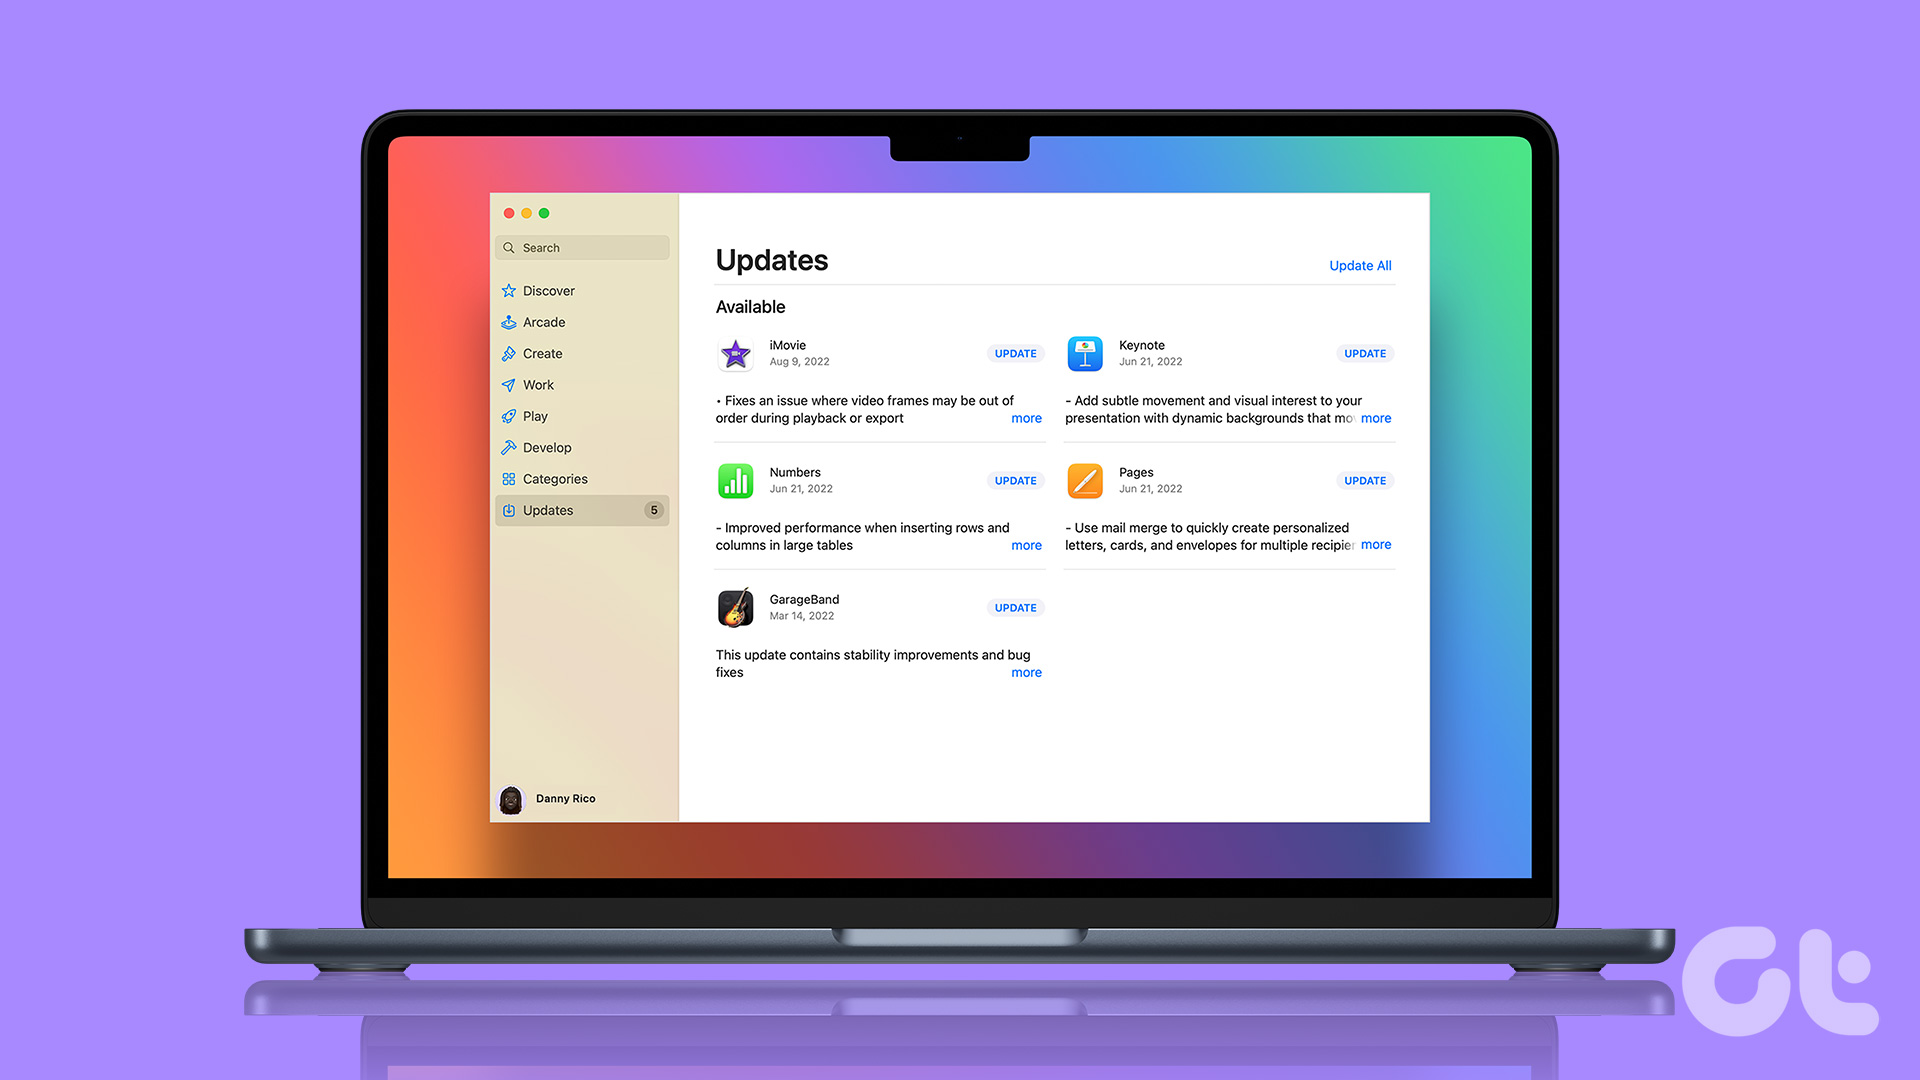 How to Update All Apps on Mac